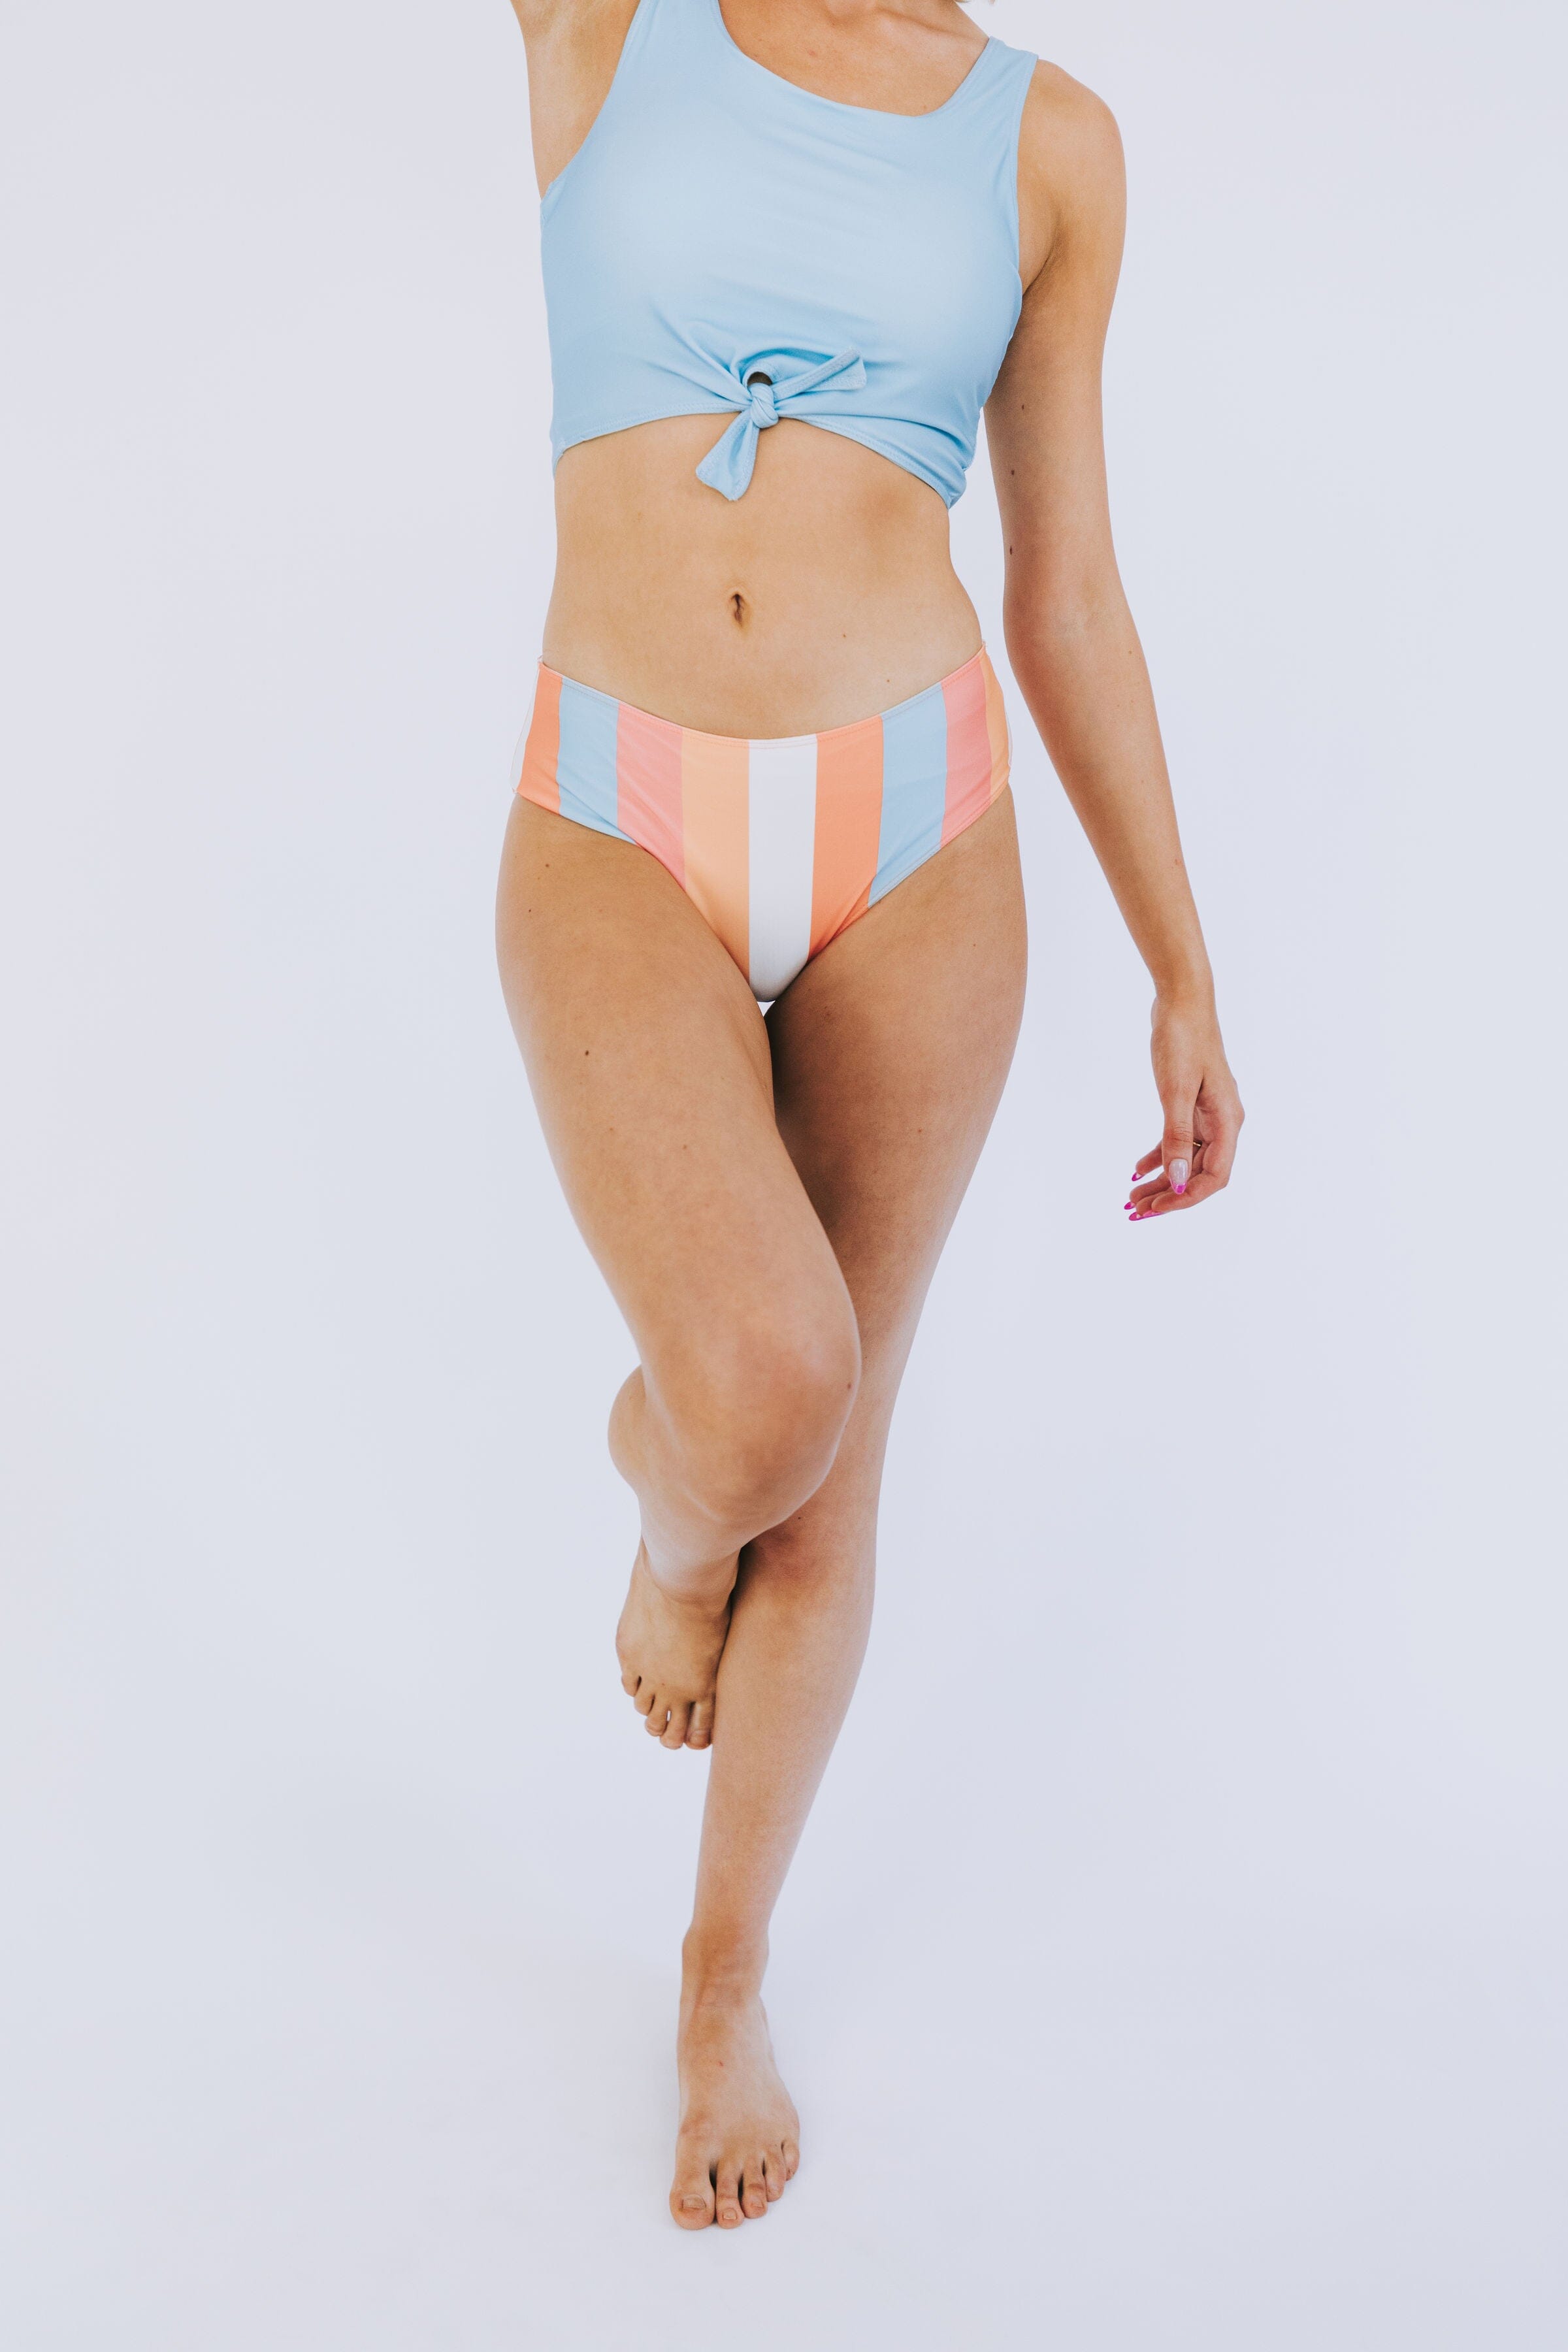 ONE LOVED BABE - Bahama Bottoms - 6 Colors